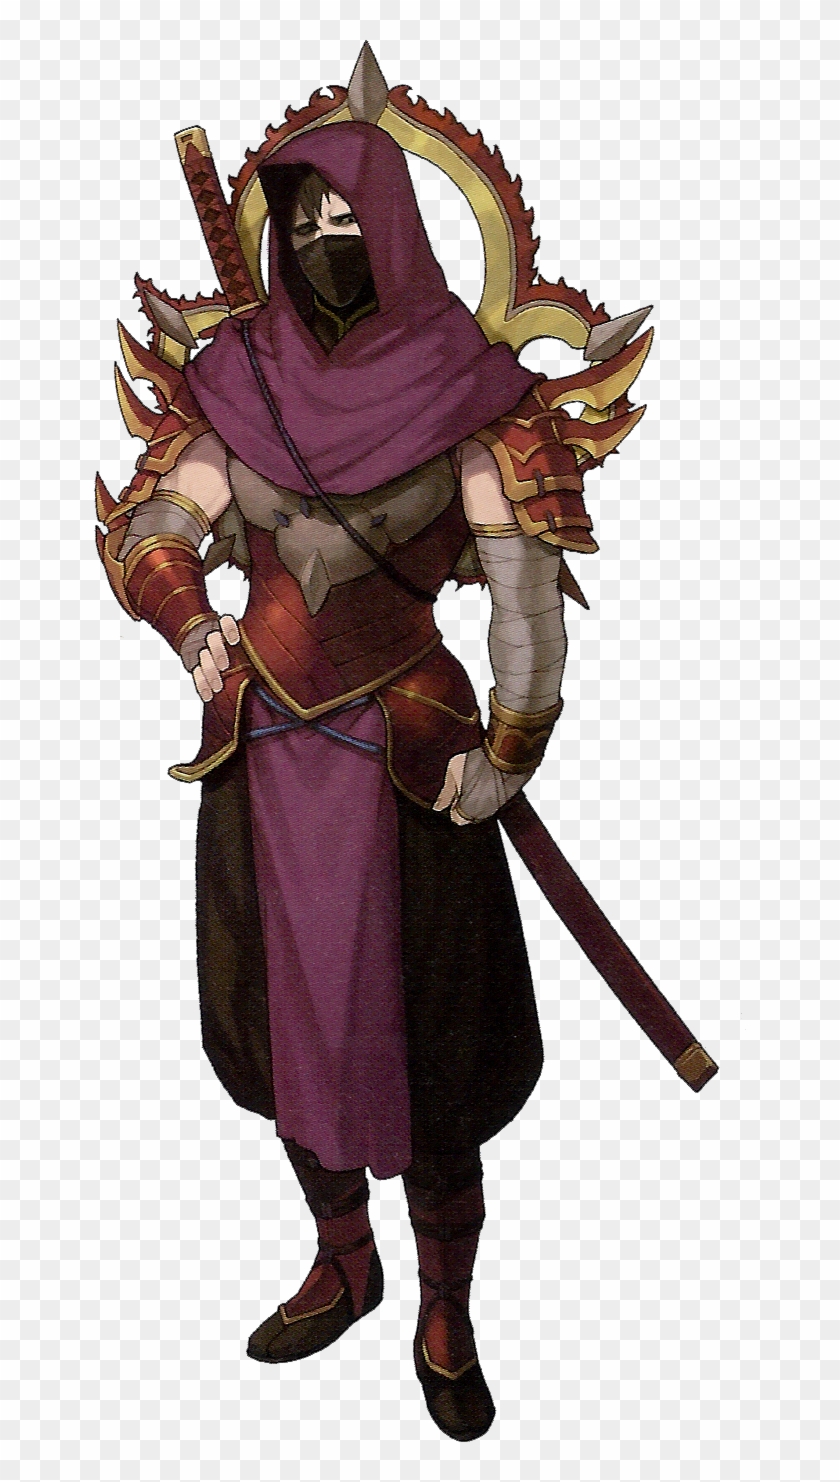 Dread Fighter - Fire Emblem Echoes Dread Fighter Clipart #4087439